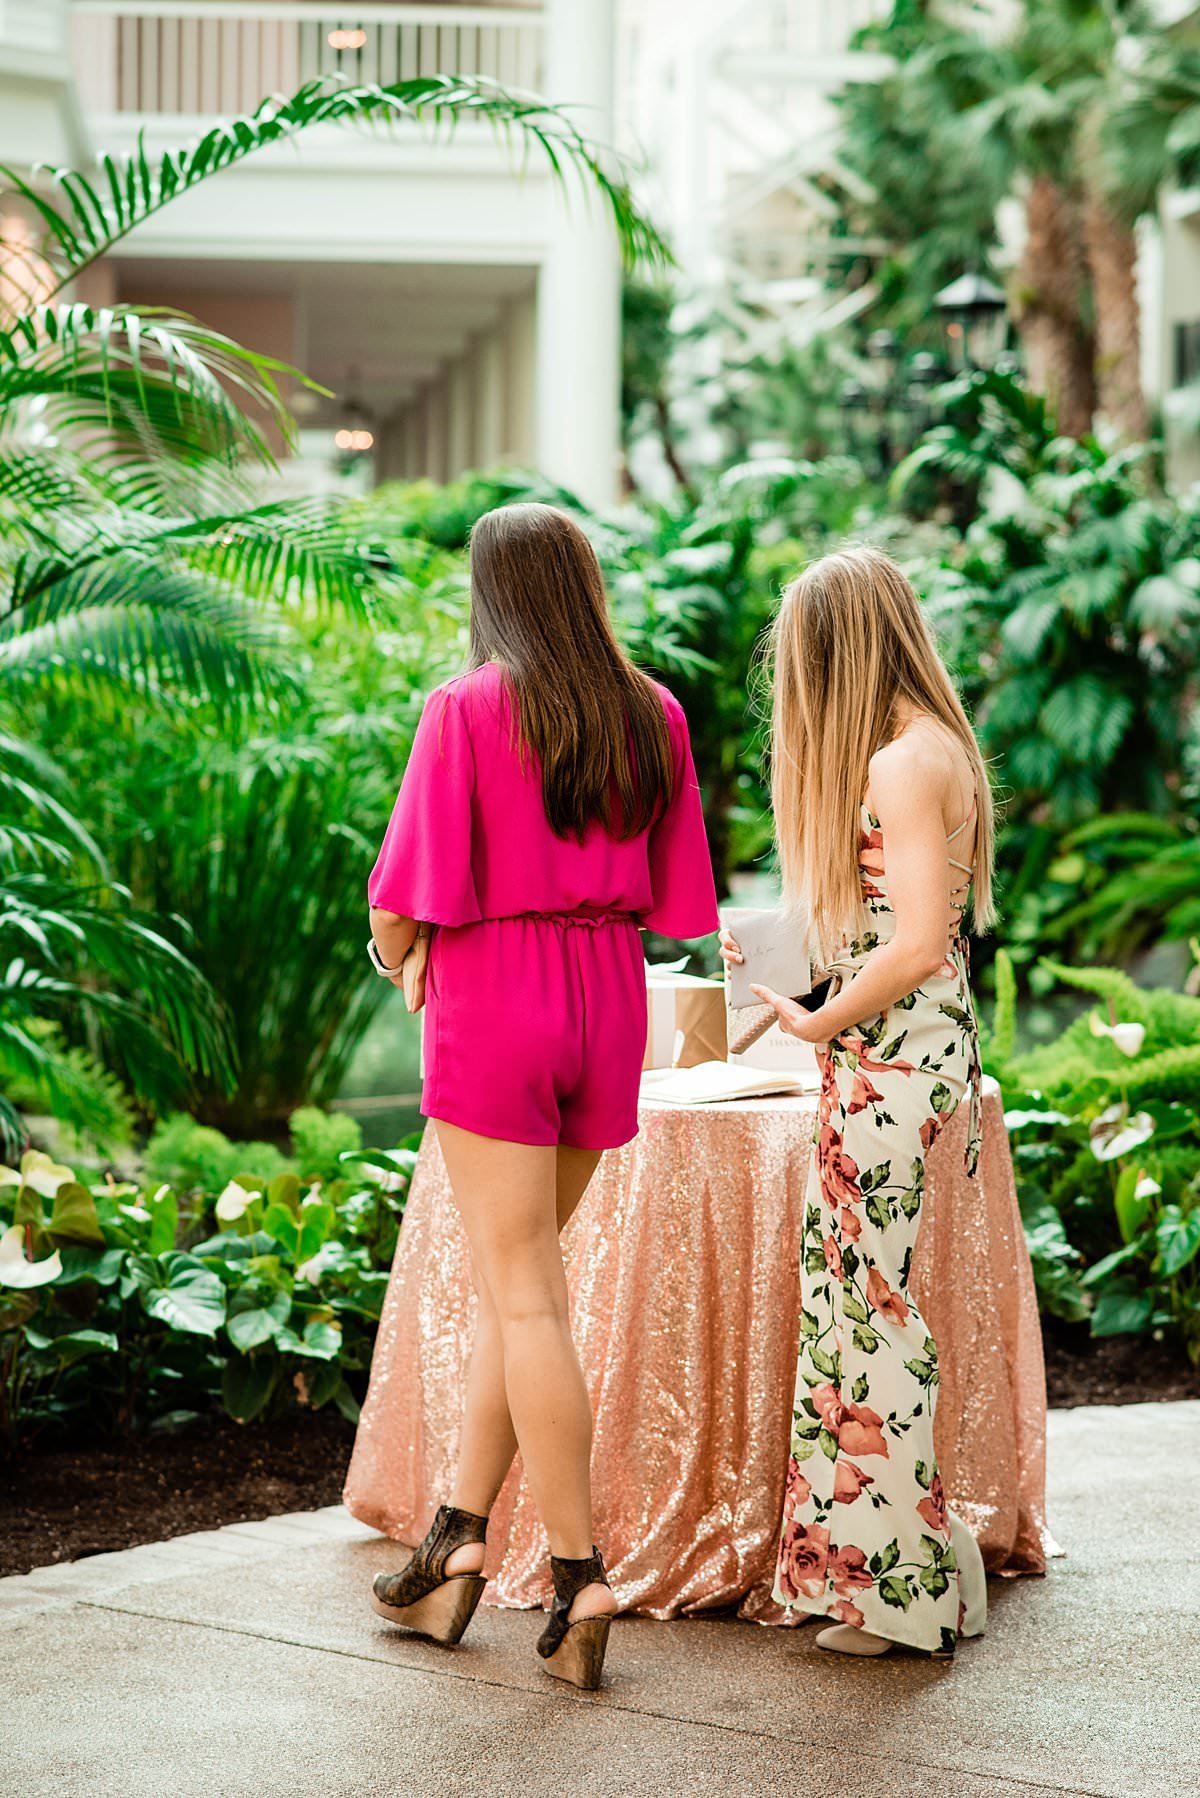 Guests signing the guest book in the lobby of Gaylord Opryland wedding